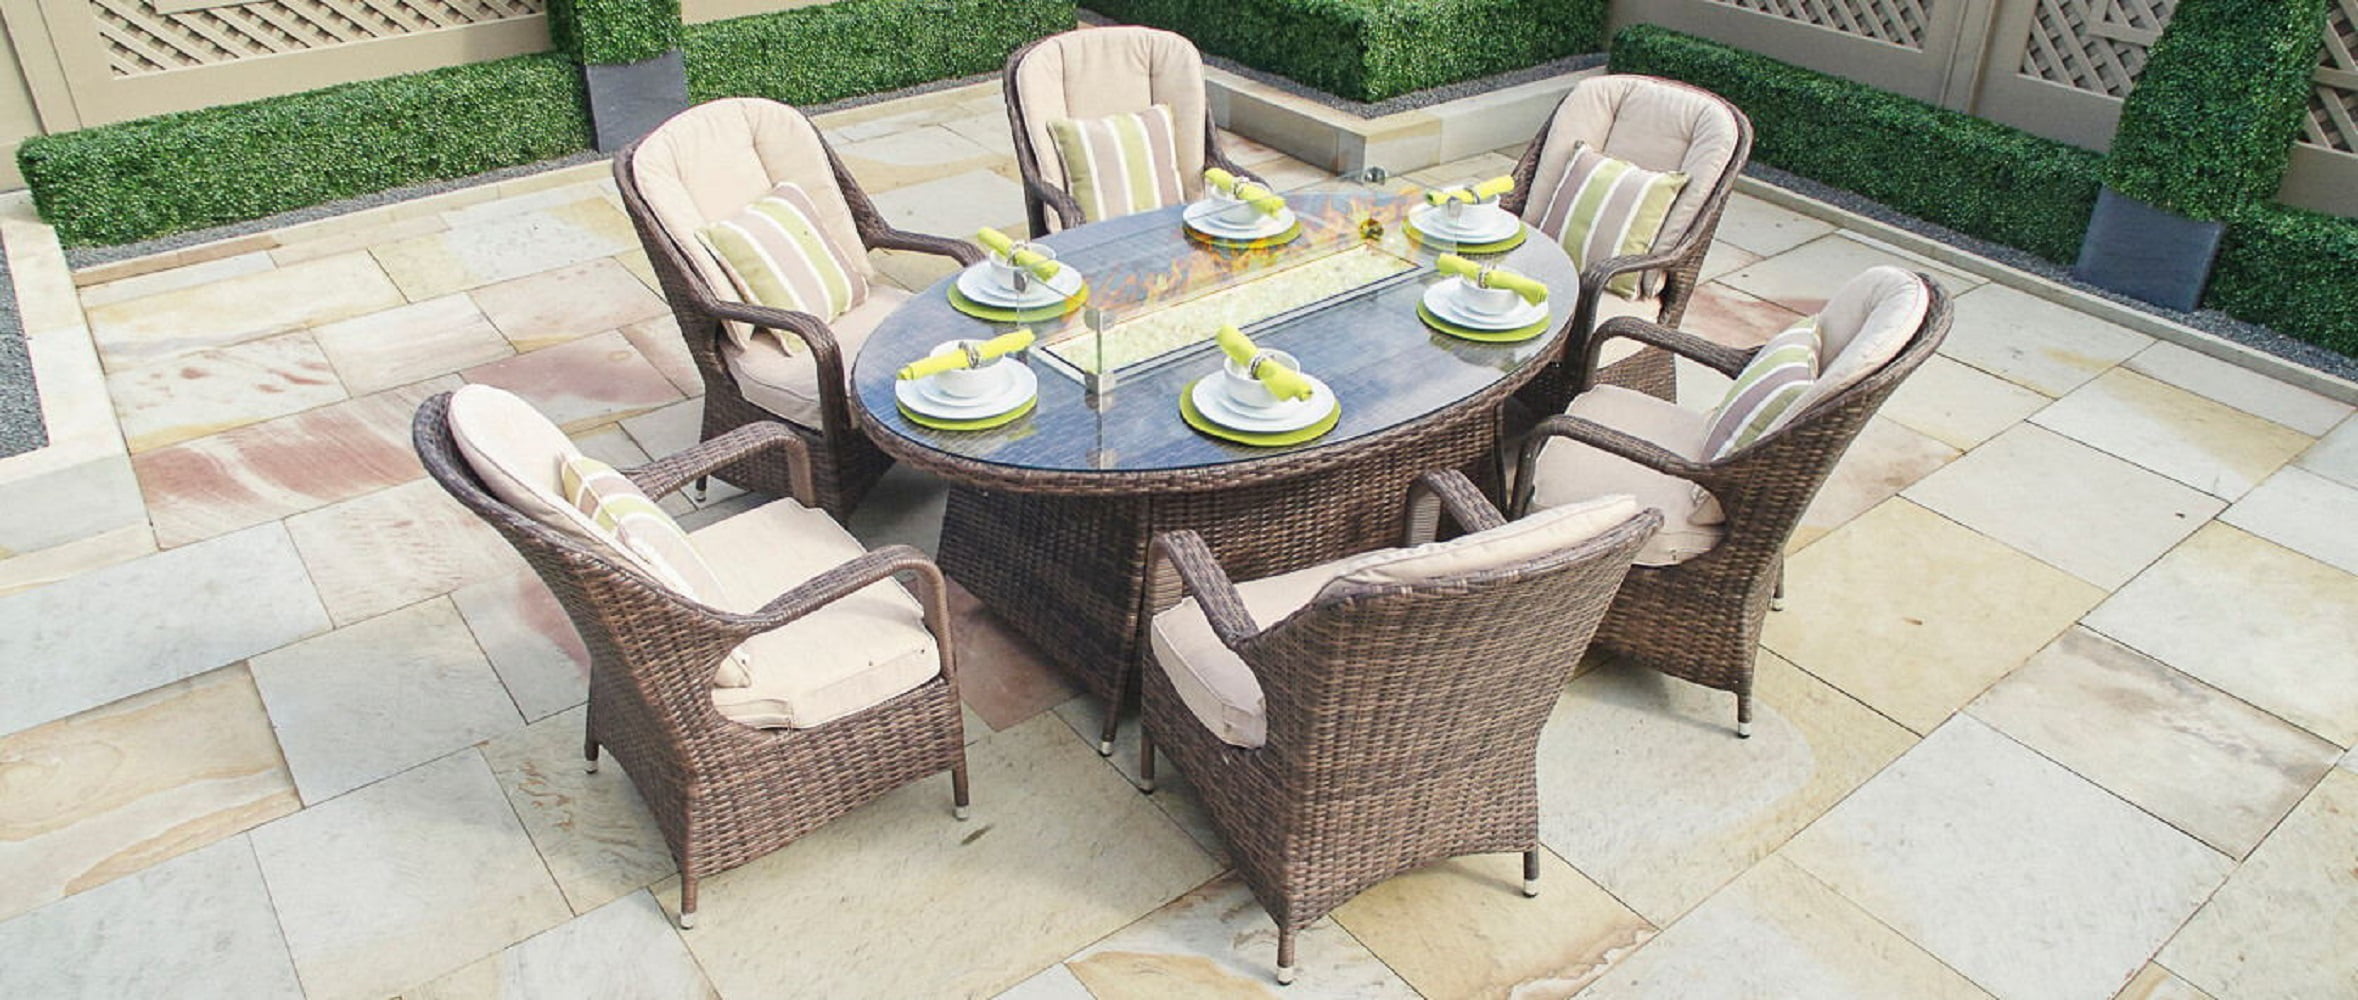 Oval Brown 7 Piece Outdoor Patio Furniture Set Dining Set Gas Fire Pit